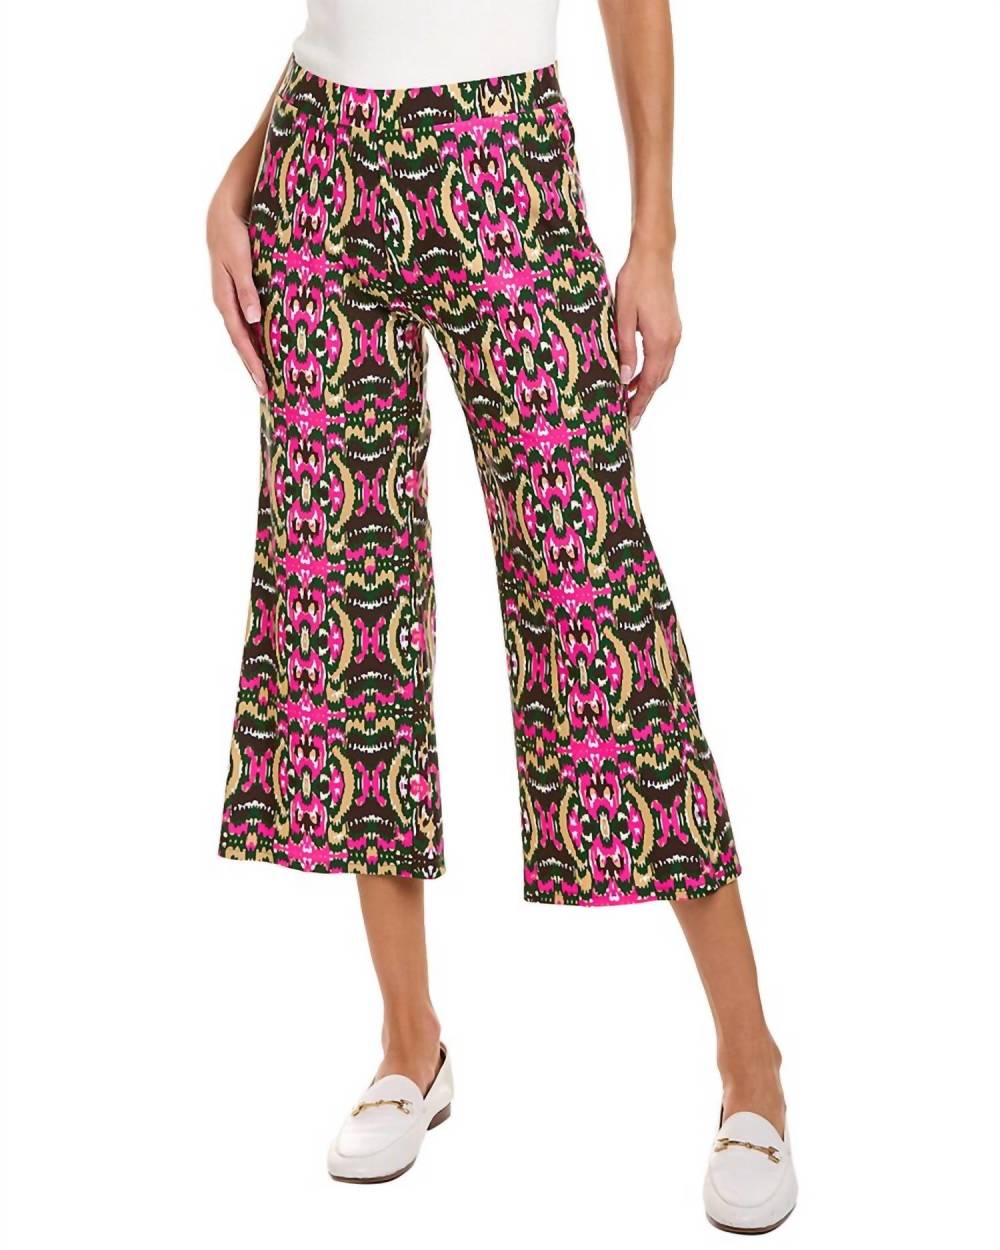 JUDE CONNALLY - Trixie Cropped Pant